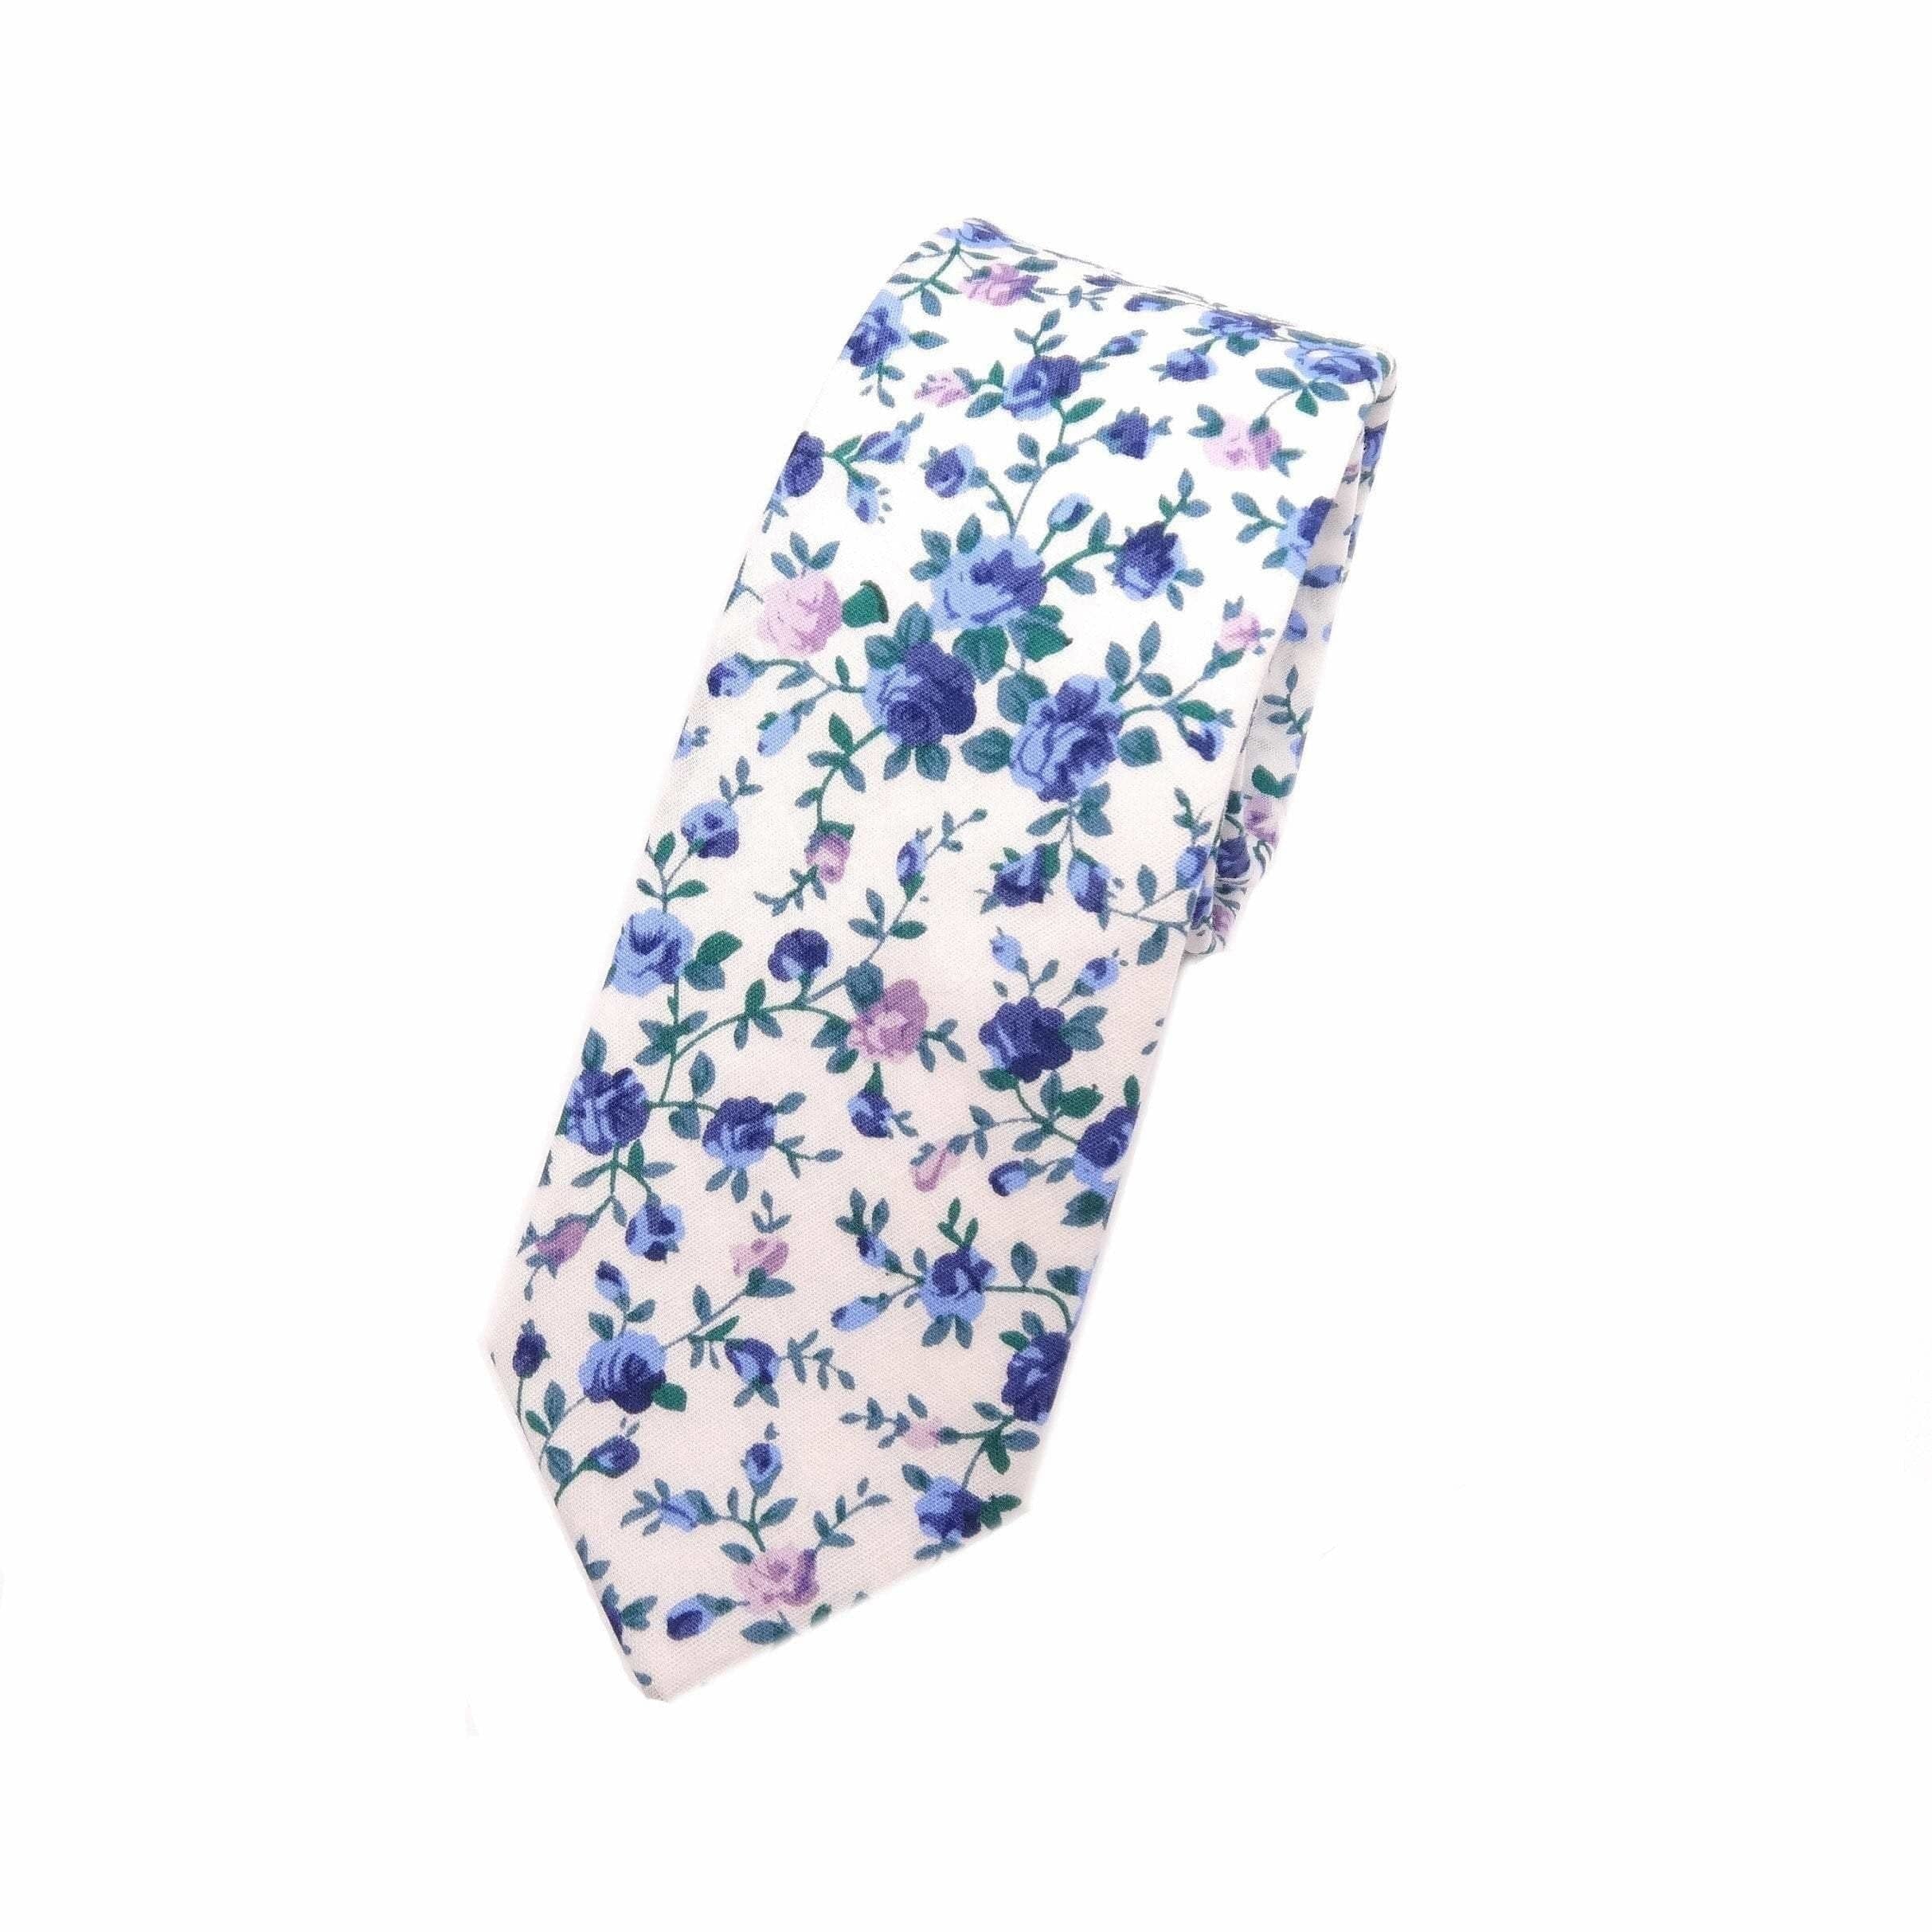 White Floral Skinny Tie 2.36&quot; Skinny WISTERIA MYTIESHOP-Neckties-White Floral Skinny Tie WISTERIA Floral Necktie for weddings and events, great for prom and anniversary gifts. Mens floral ties near me us ties tie-Mytieshop. Skinny ties for weddings anniversaries. Father of bride. Groomsmen. Cool skinny neckties for men. Neckwear for prom, missions and fancy events. Gift ideas for men. Anniversaries ideas. Wedding aesthetics. Flower ties. Dry flower ties.